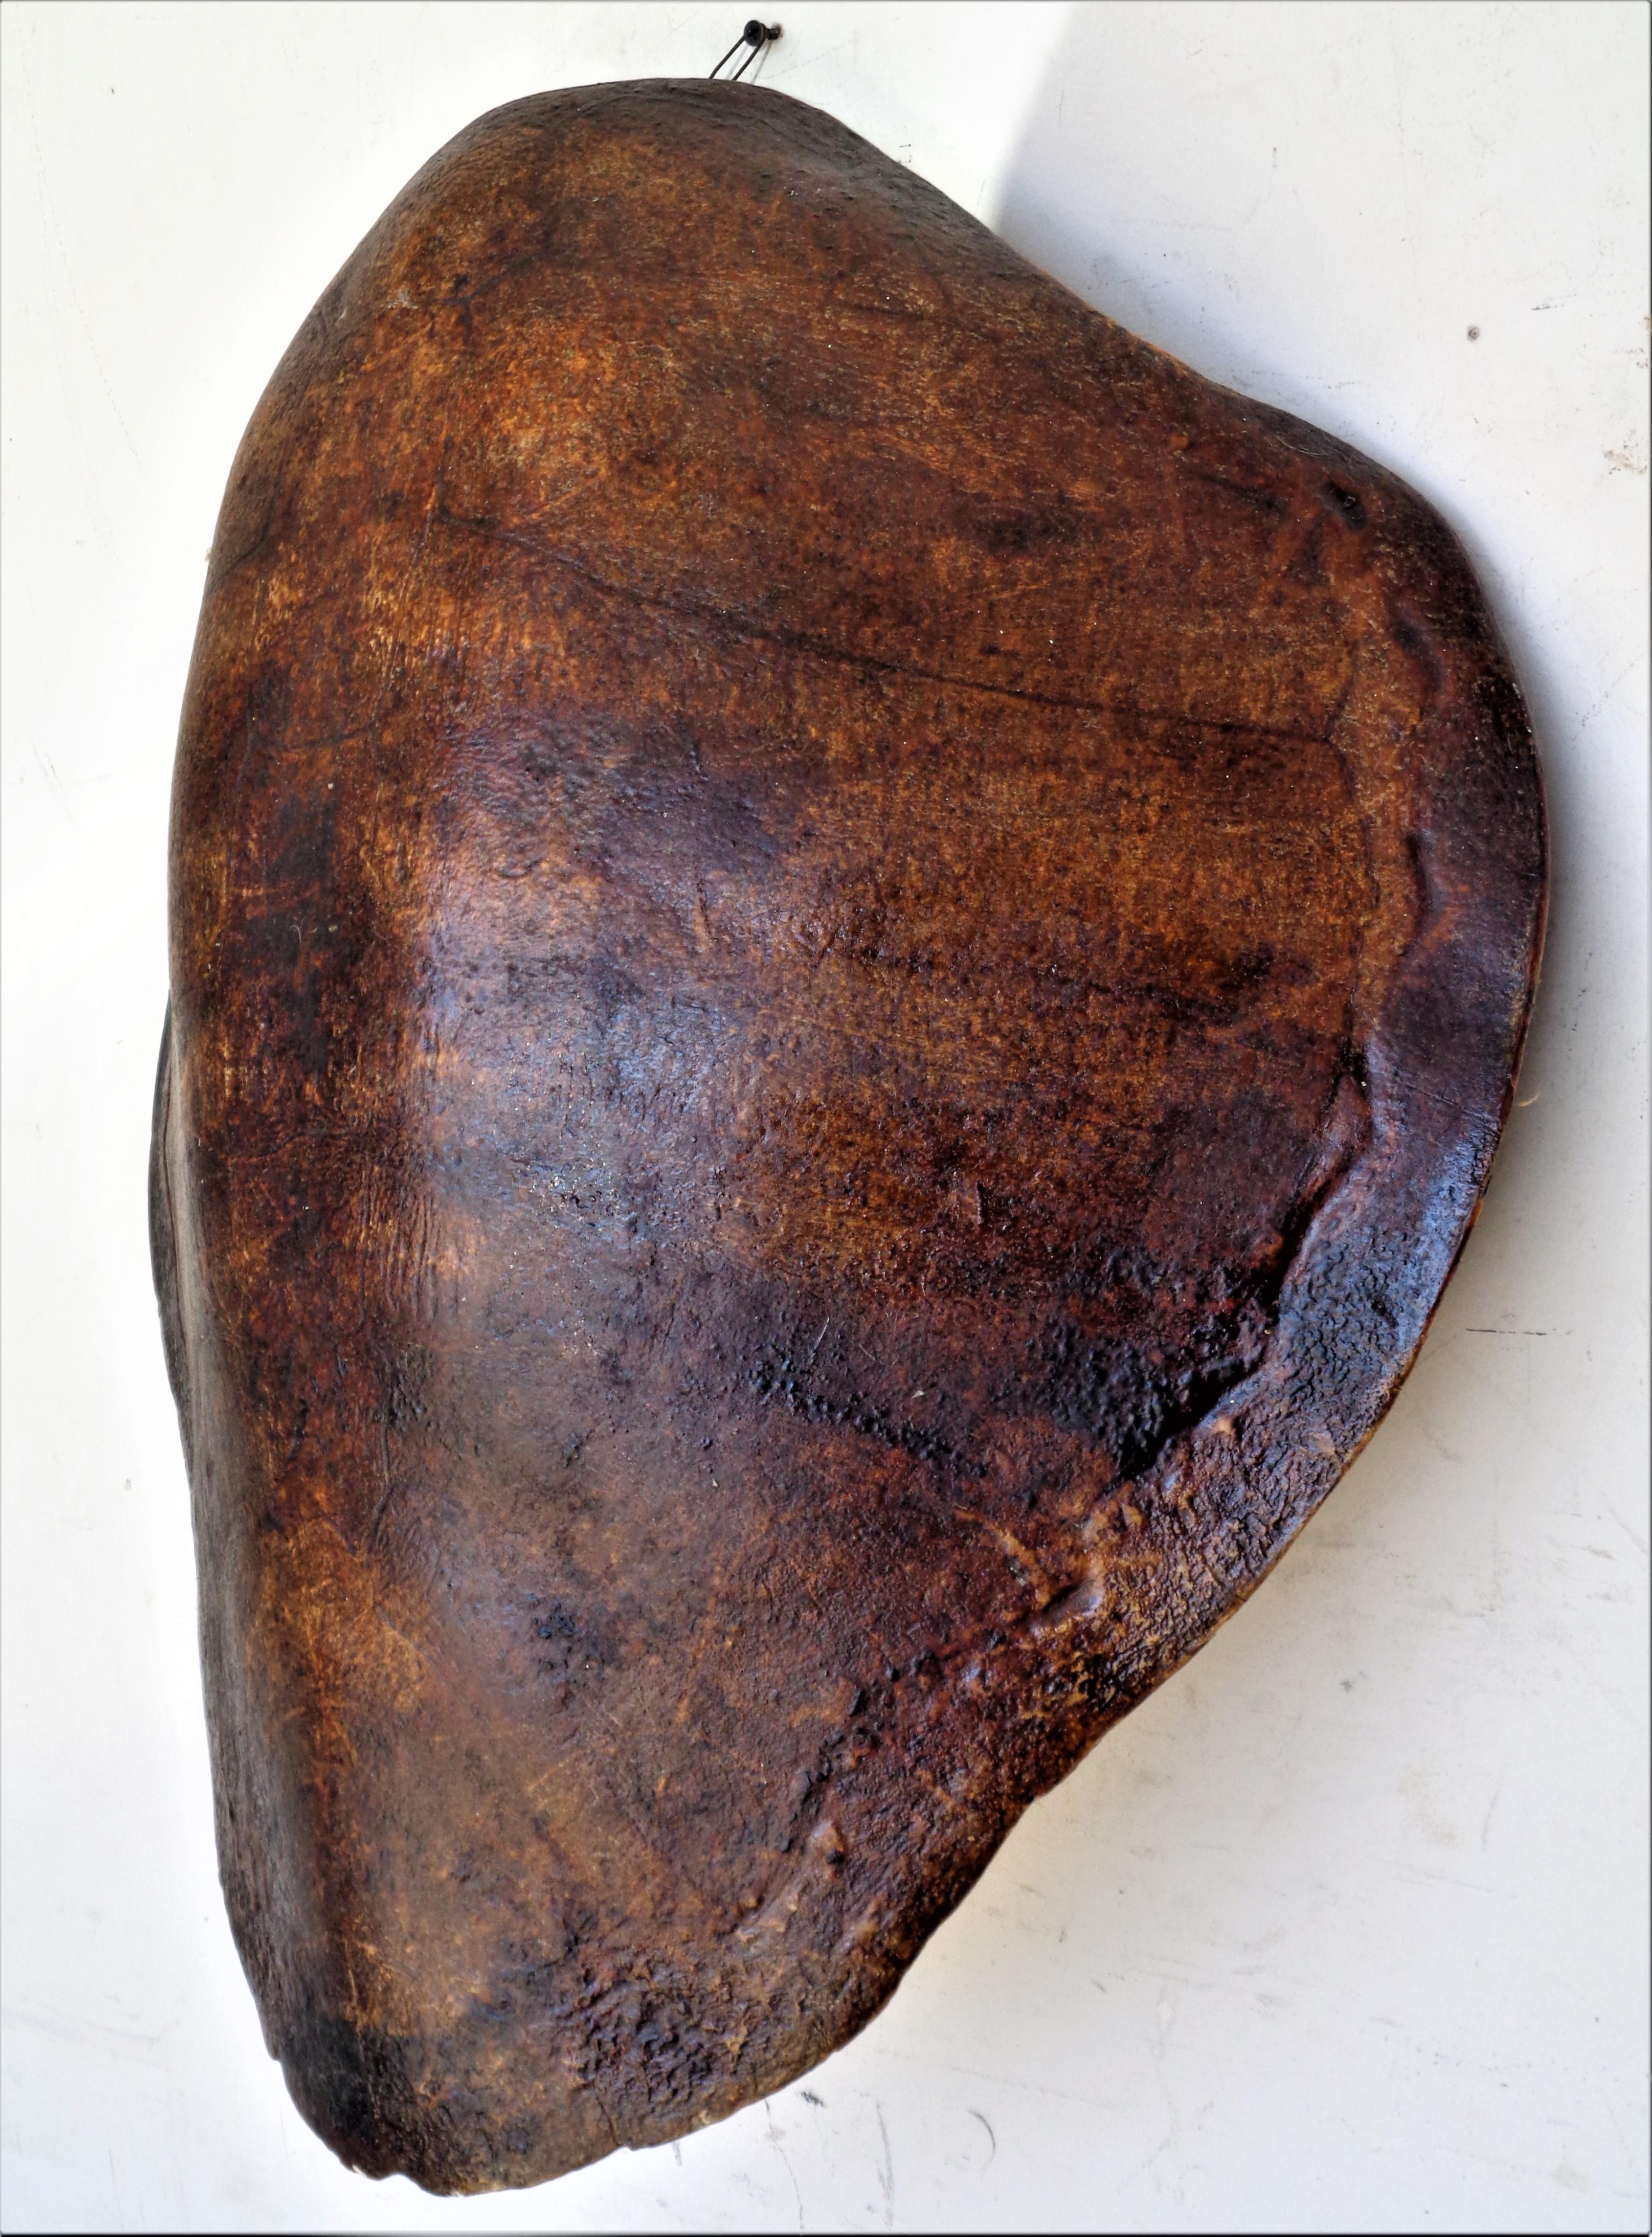 Antique sea turtle shell carapace, natural history specimen. Great vintage condition with beautifully aged color. From old private collection. Circa 1900. Measures as photographed (see primary image) 25 inches high x 23 inches wide x 8 inches deep.